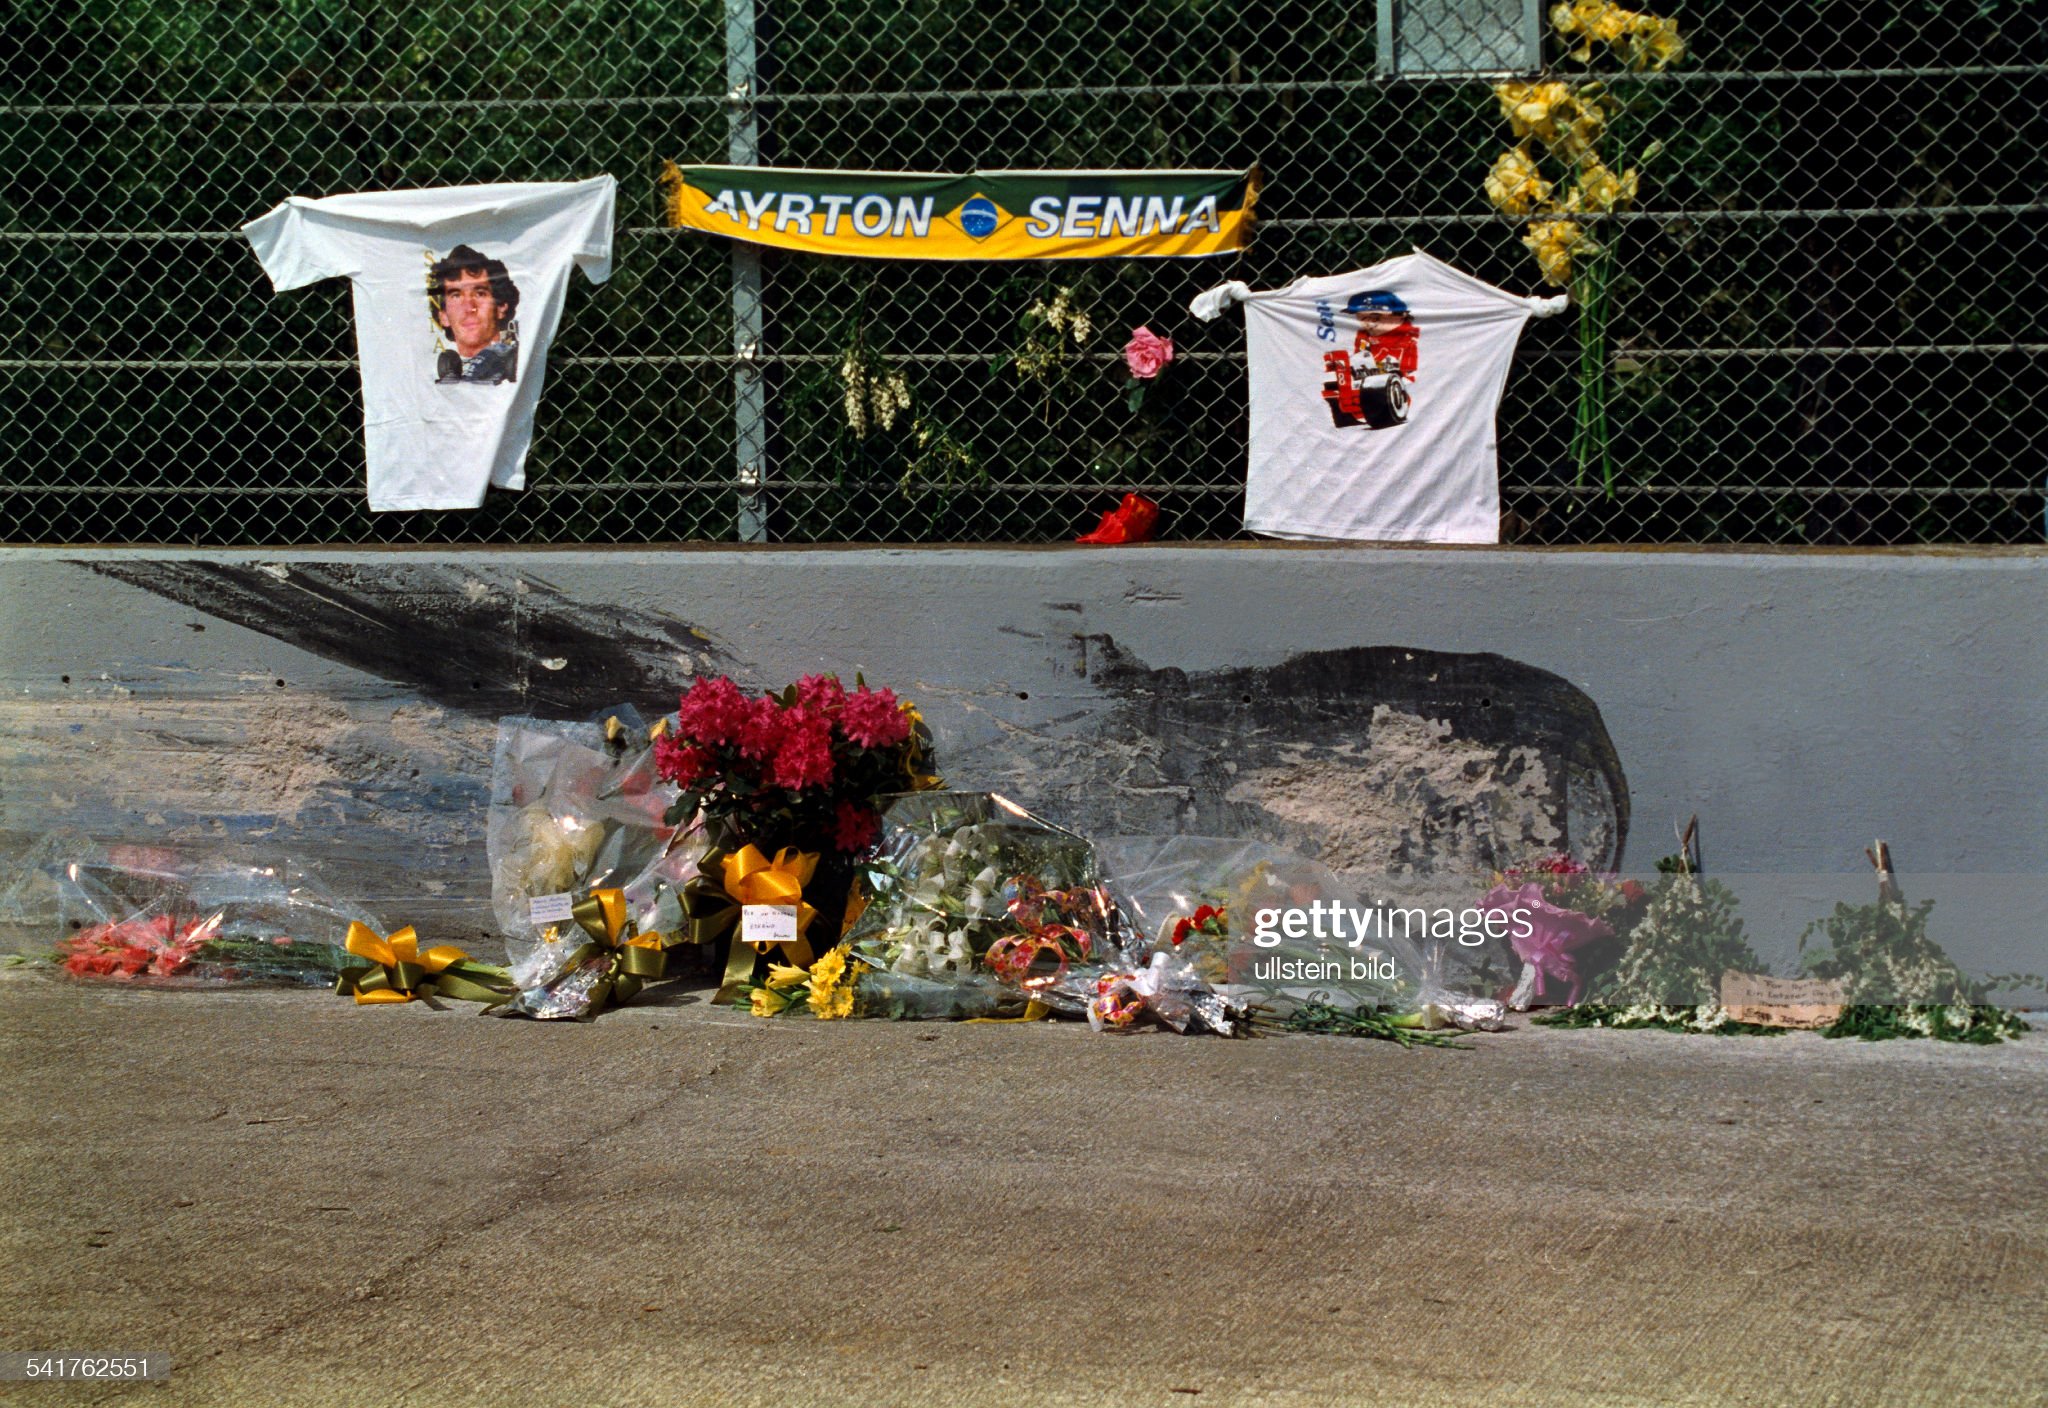 The scene of the accident of Ayrton Senna decorated with flowers by fans in the Tamburello curve on the Imola circuit where Senna died, August 01, 1994. 